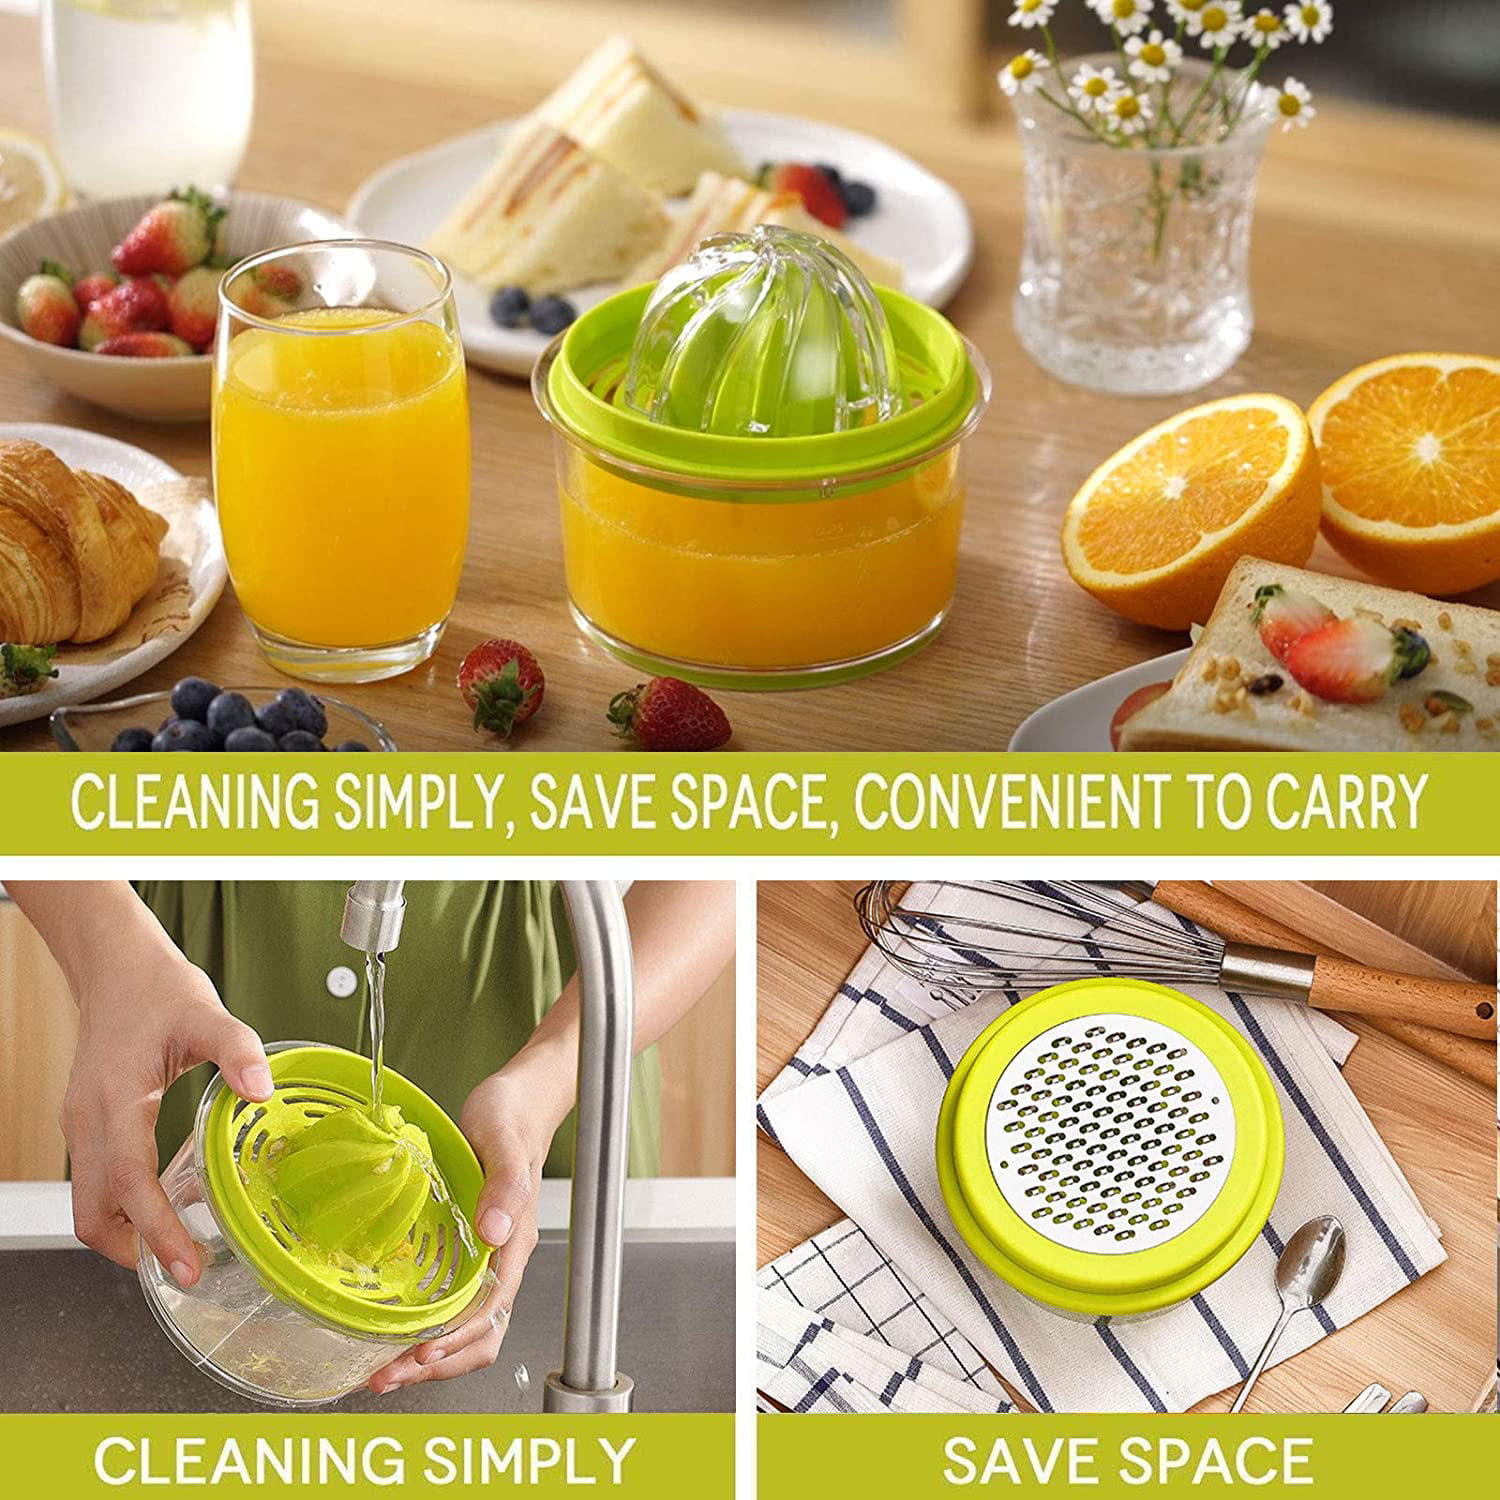 Ginger Garlic Cheese Grater Lemon Manual Hand Squeezer with Built-in 16OZ Measuring Cup Grater，Multi-function Manual Juicer with Multi-size Reamers and Non-Slip Base Citrus Orange Juicer 